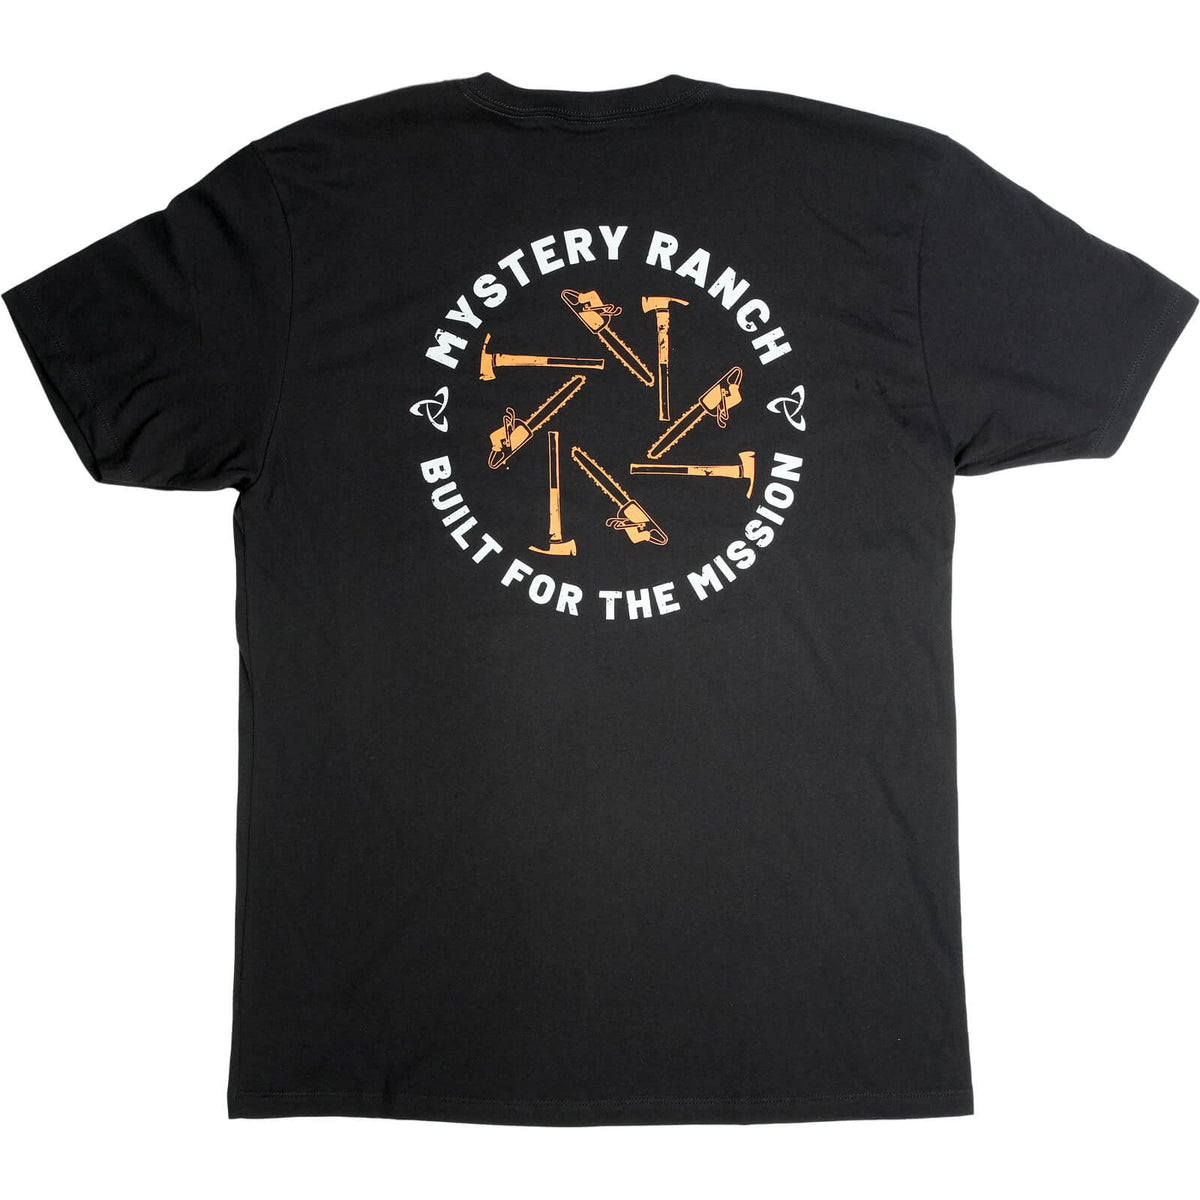 Mystery Ranch Tools In the Round T-Shirt